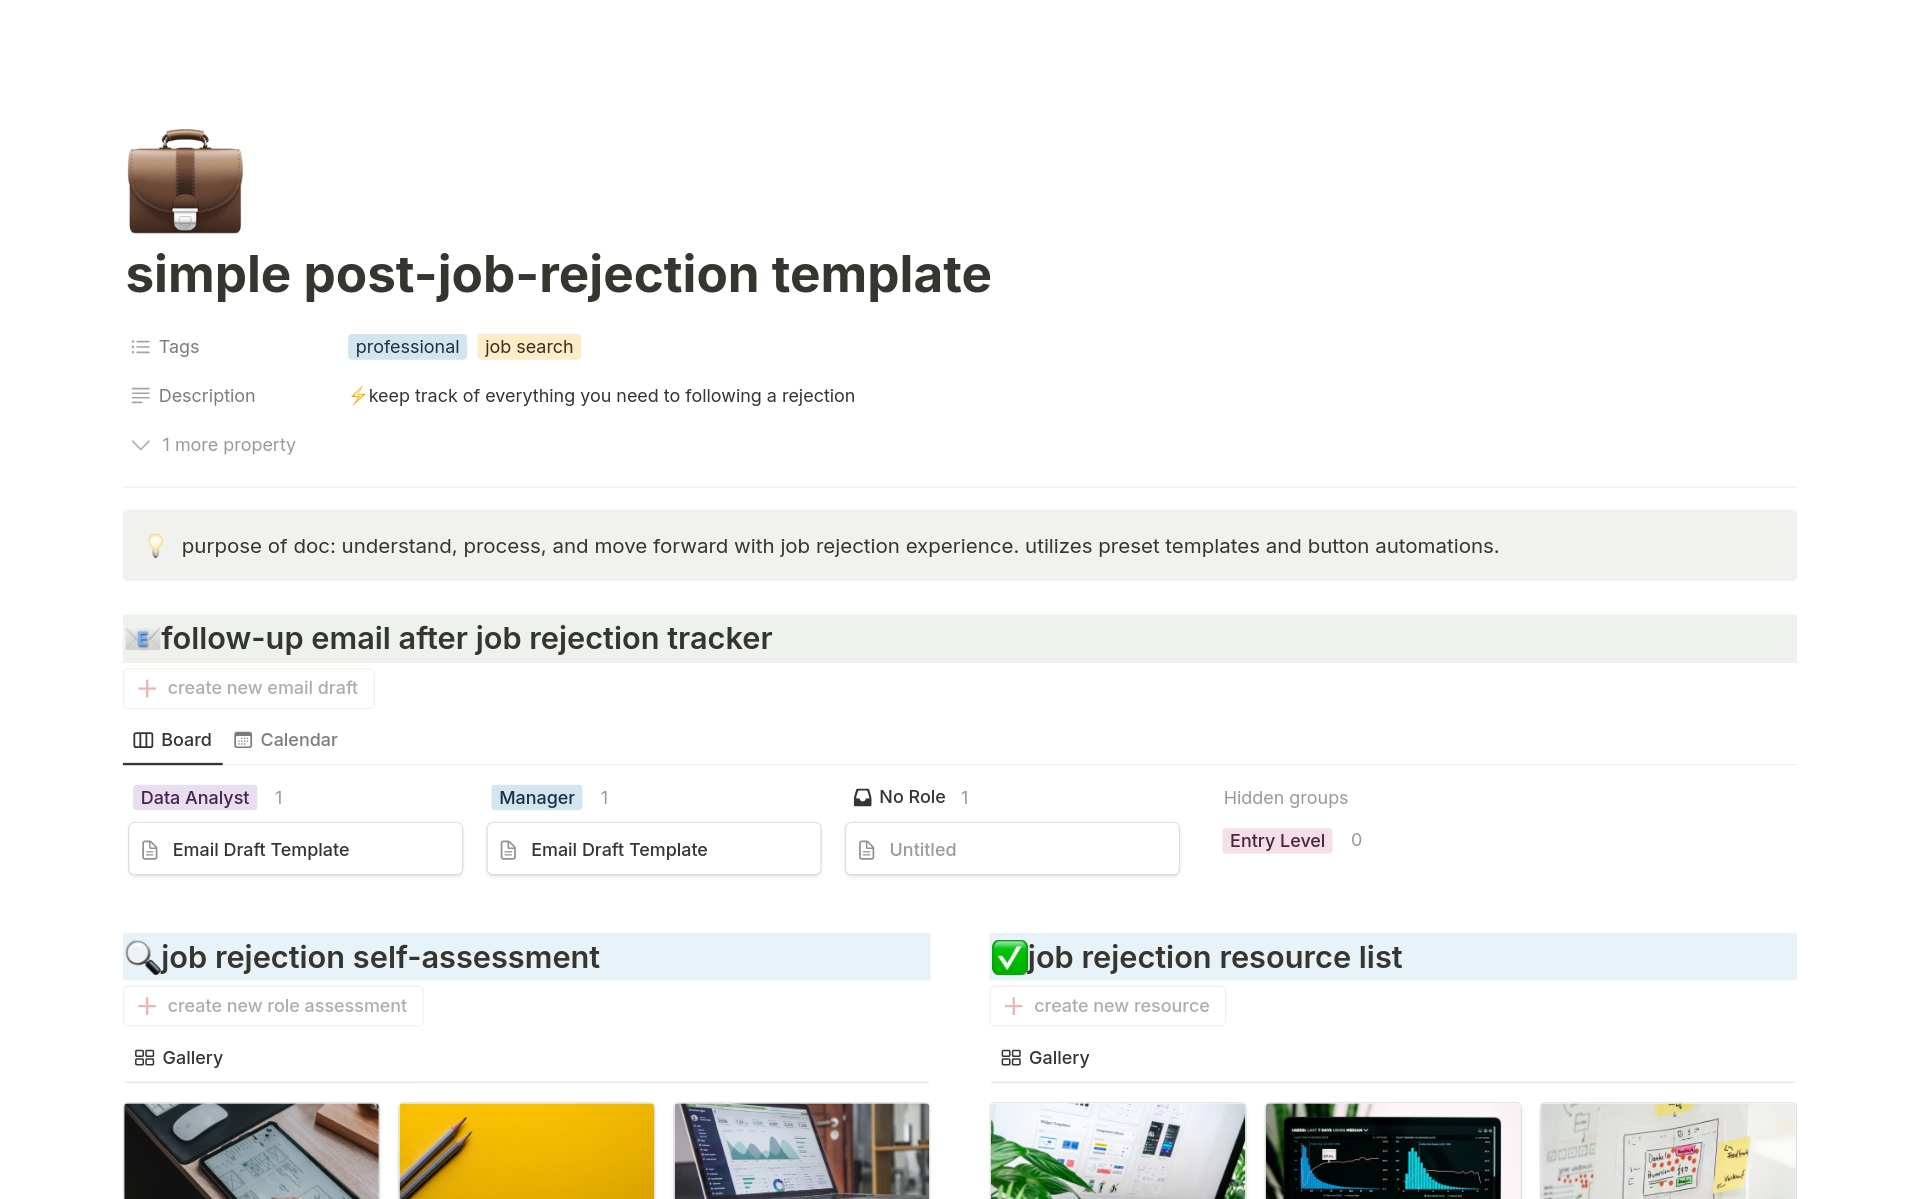 This dashboard is designed to help you deal with job rejections and use them as opportunities for growth. It includes trackers and databases to help you understand and process your experience.